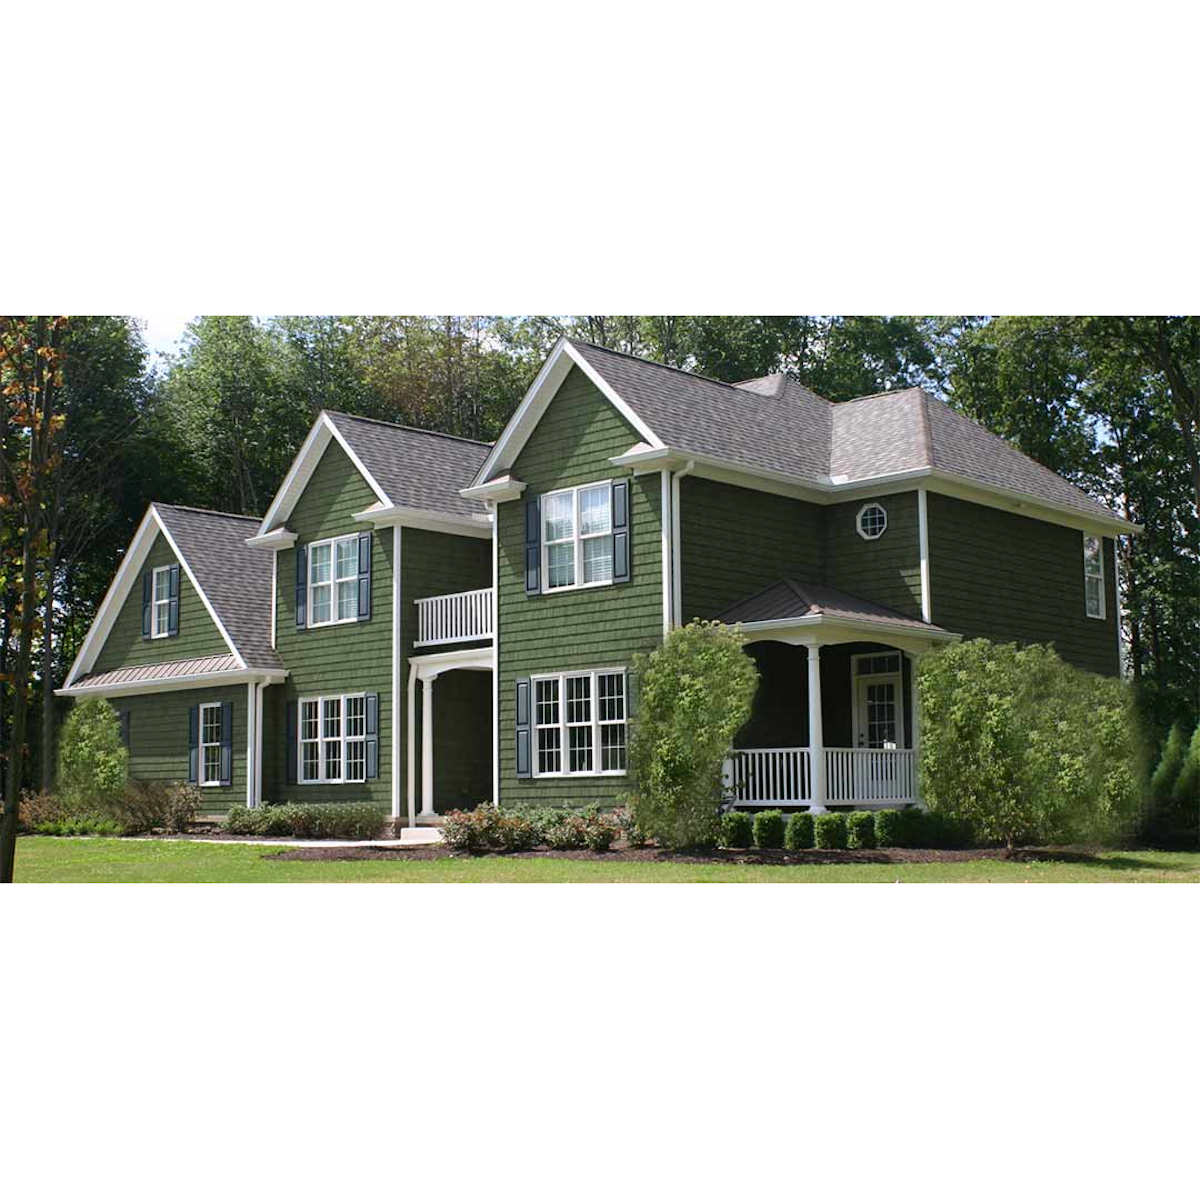 Forest Green Siding On a House